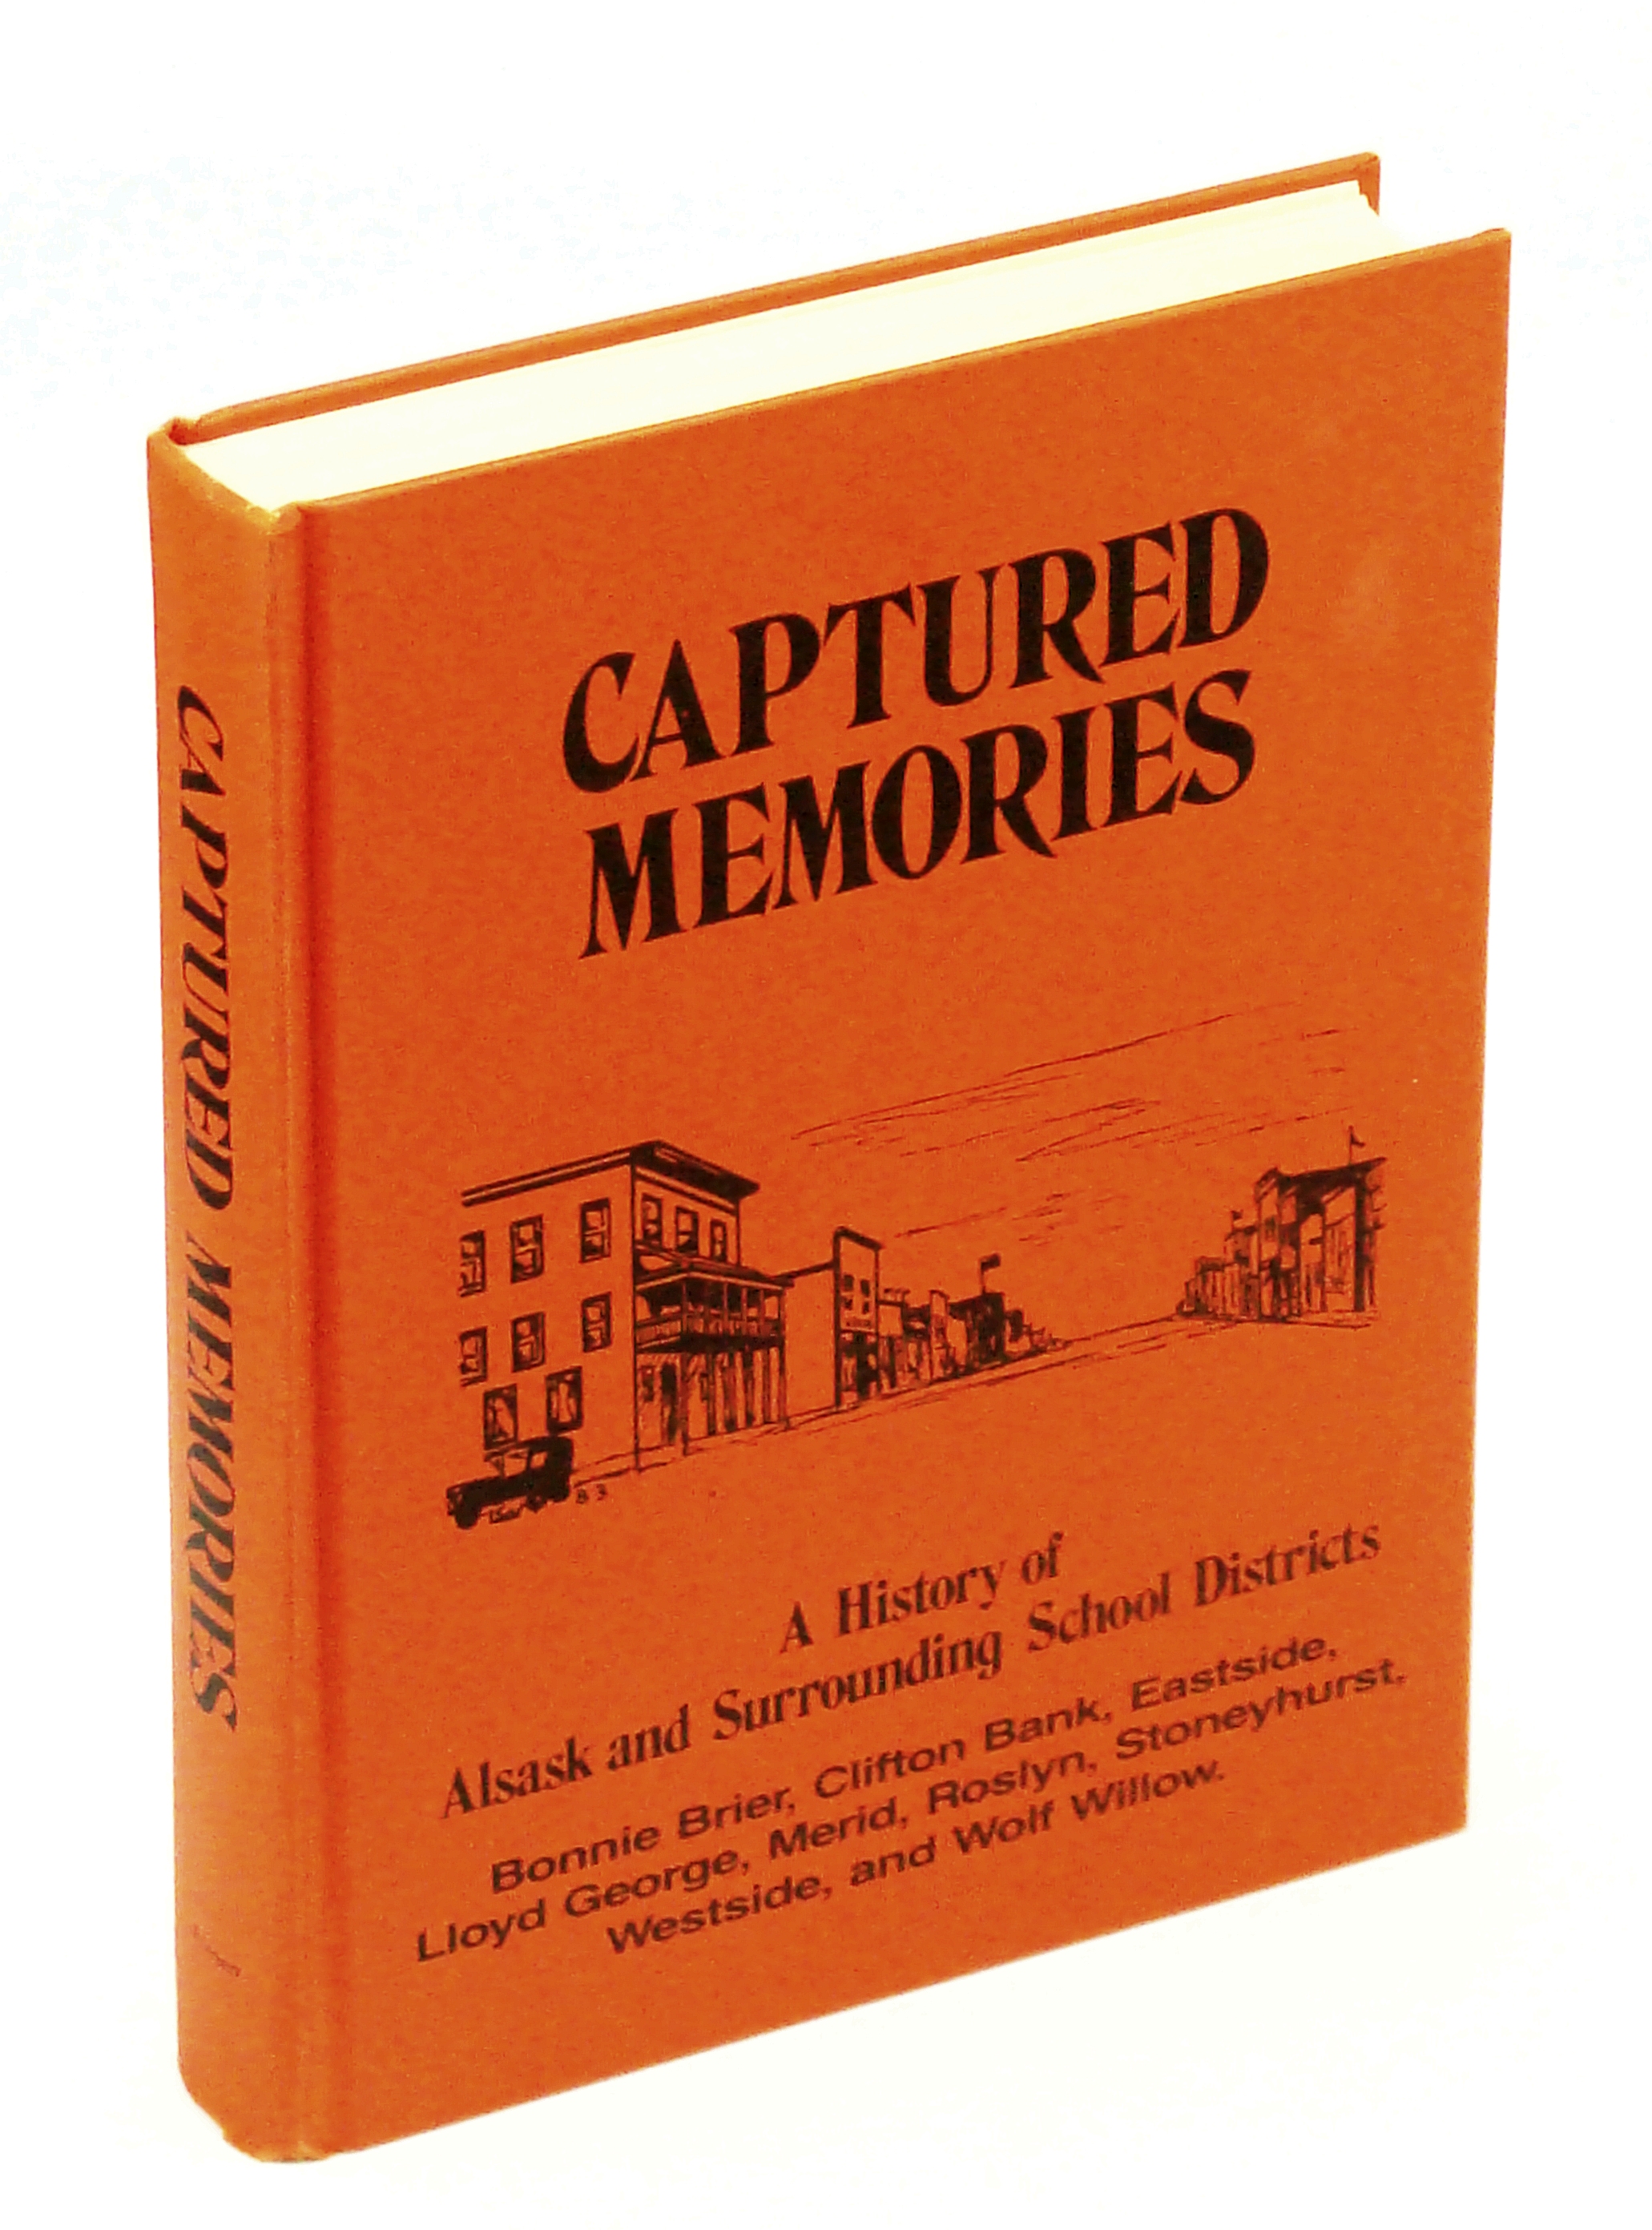 Image for Captured Memories: A History of Alsask and Surrounding School Districts [Saskatchewan Local History] Bonnie Brier, Clifton Bank, Eastside, Lloyd George, Merid, Roslyn, Stoneyhurst, Westside, and Wolf Willow